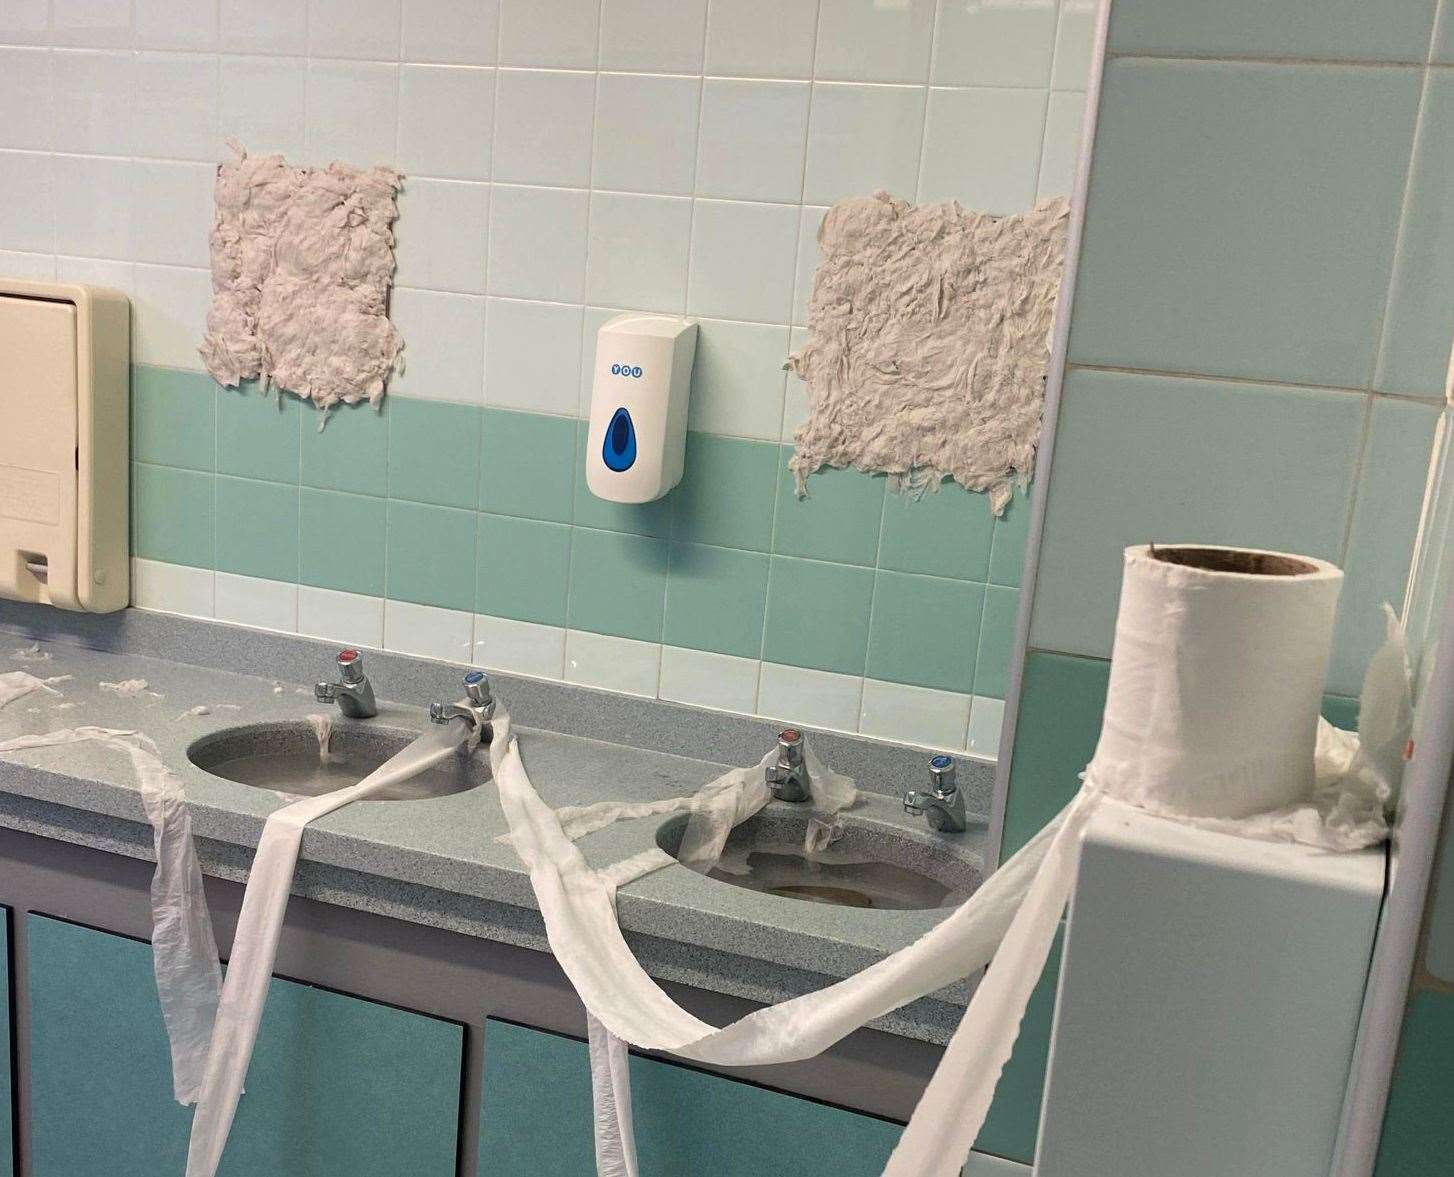 Wet tissue was stuck to the mirrors on the wall. Picture: Tenterden Town Council